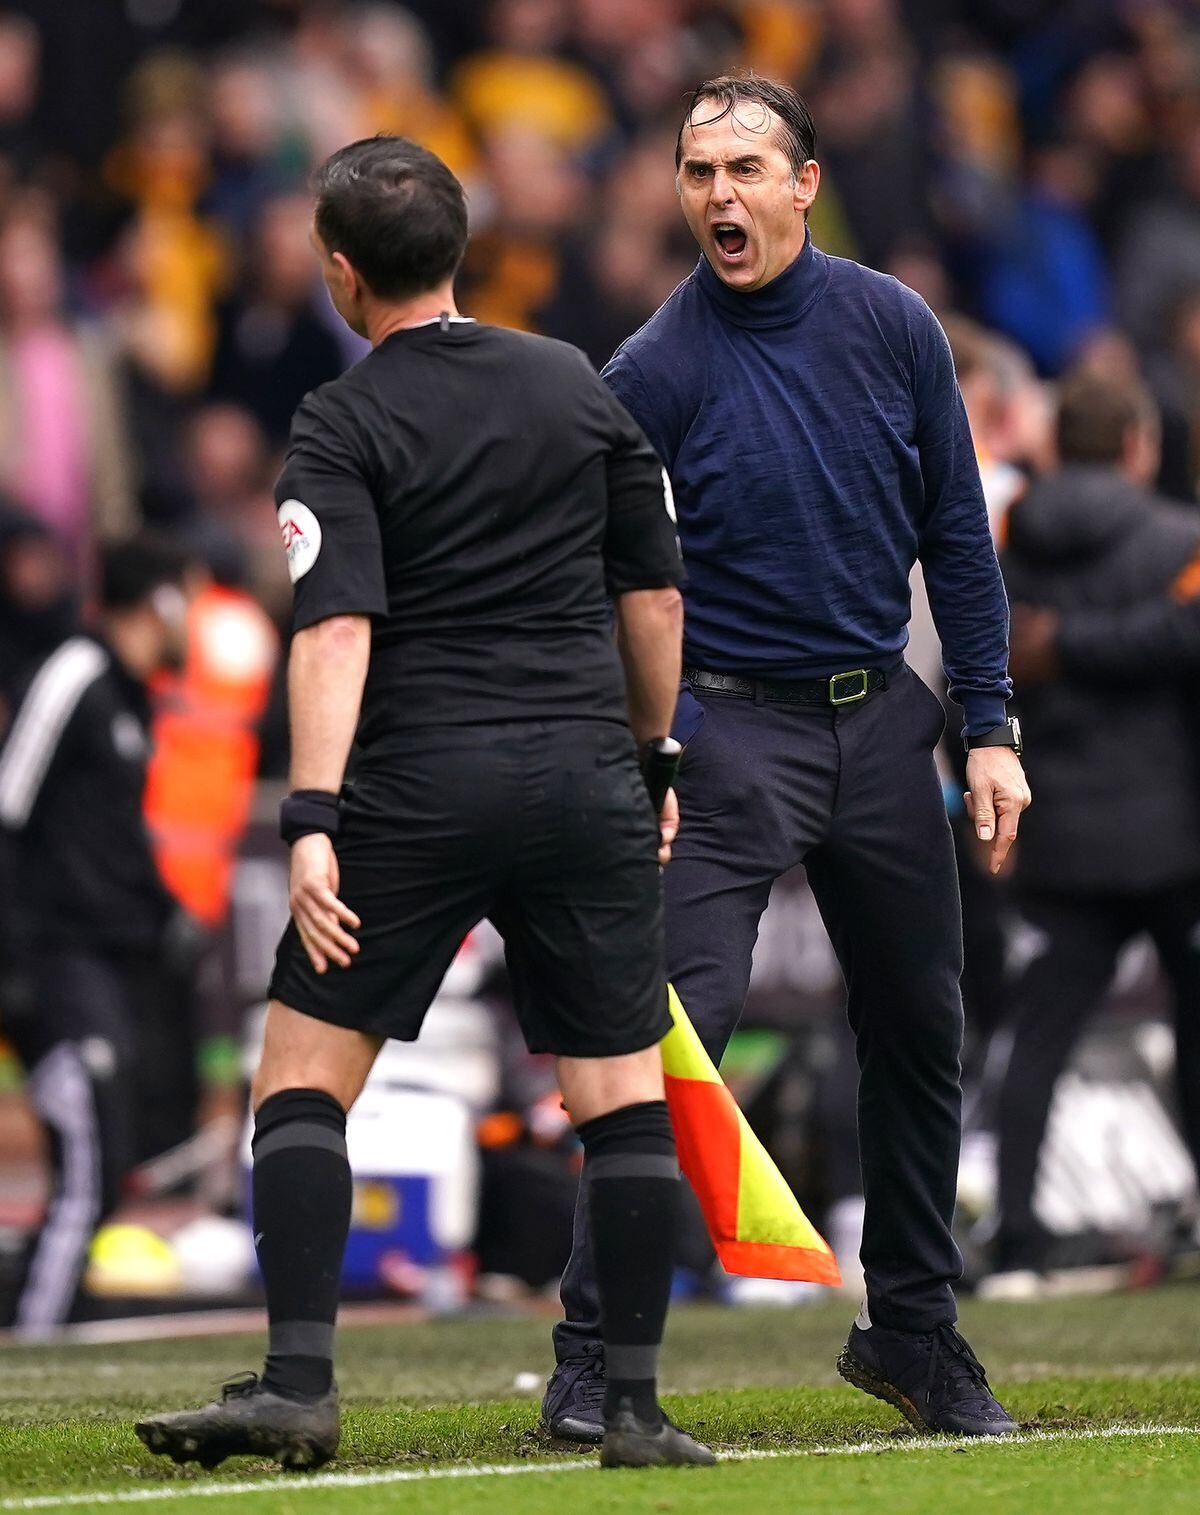 Wolverhampton Wanderers manager Julen Lopetegui (right) reacts to assistant referee Gary Beswick